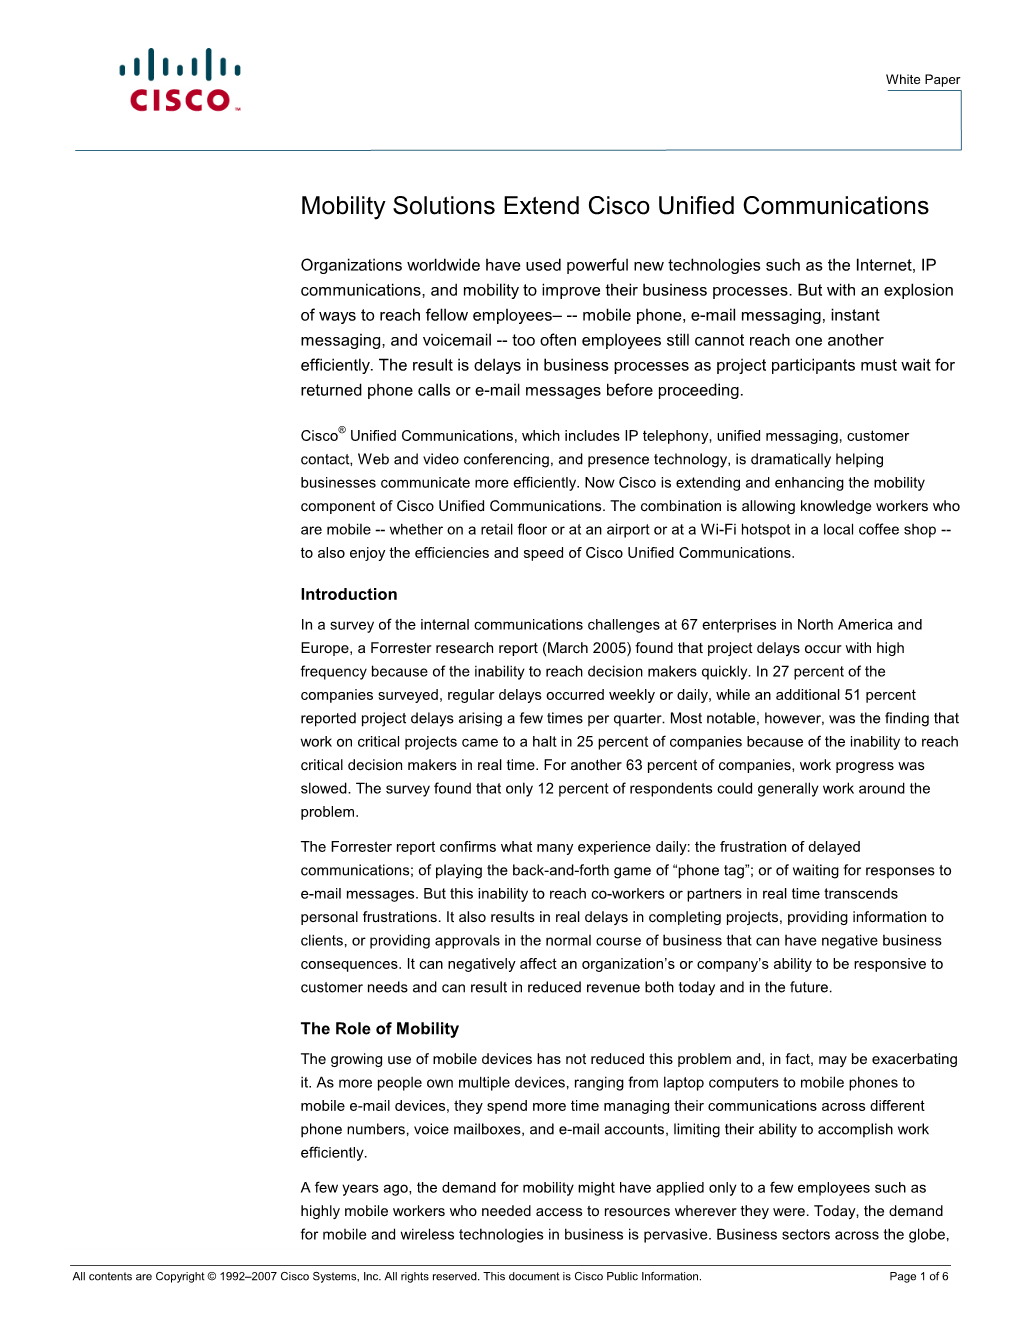 Mobility Solutions Extend Cisco Unified Communications